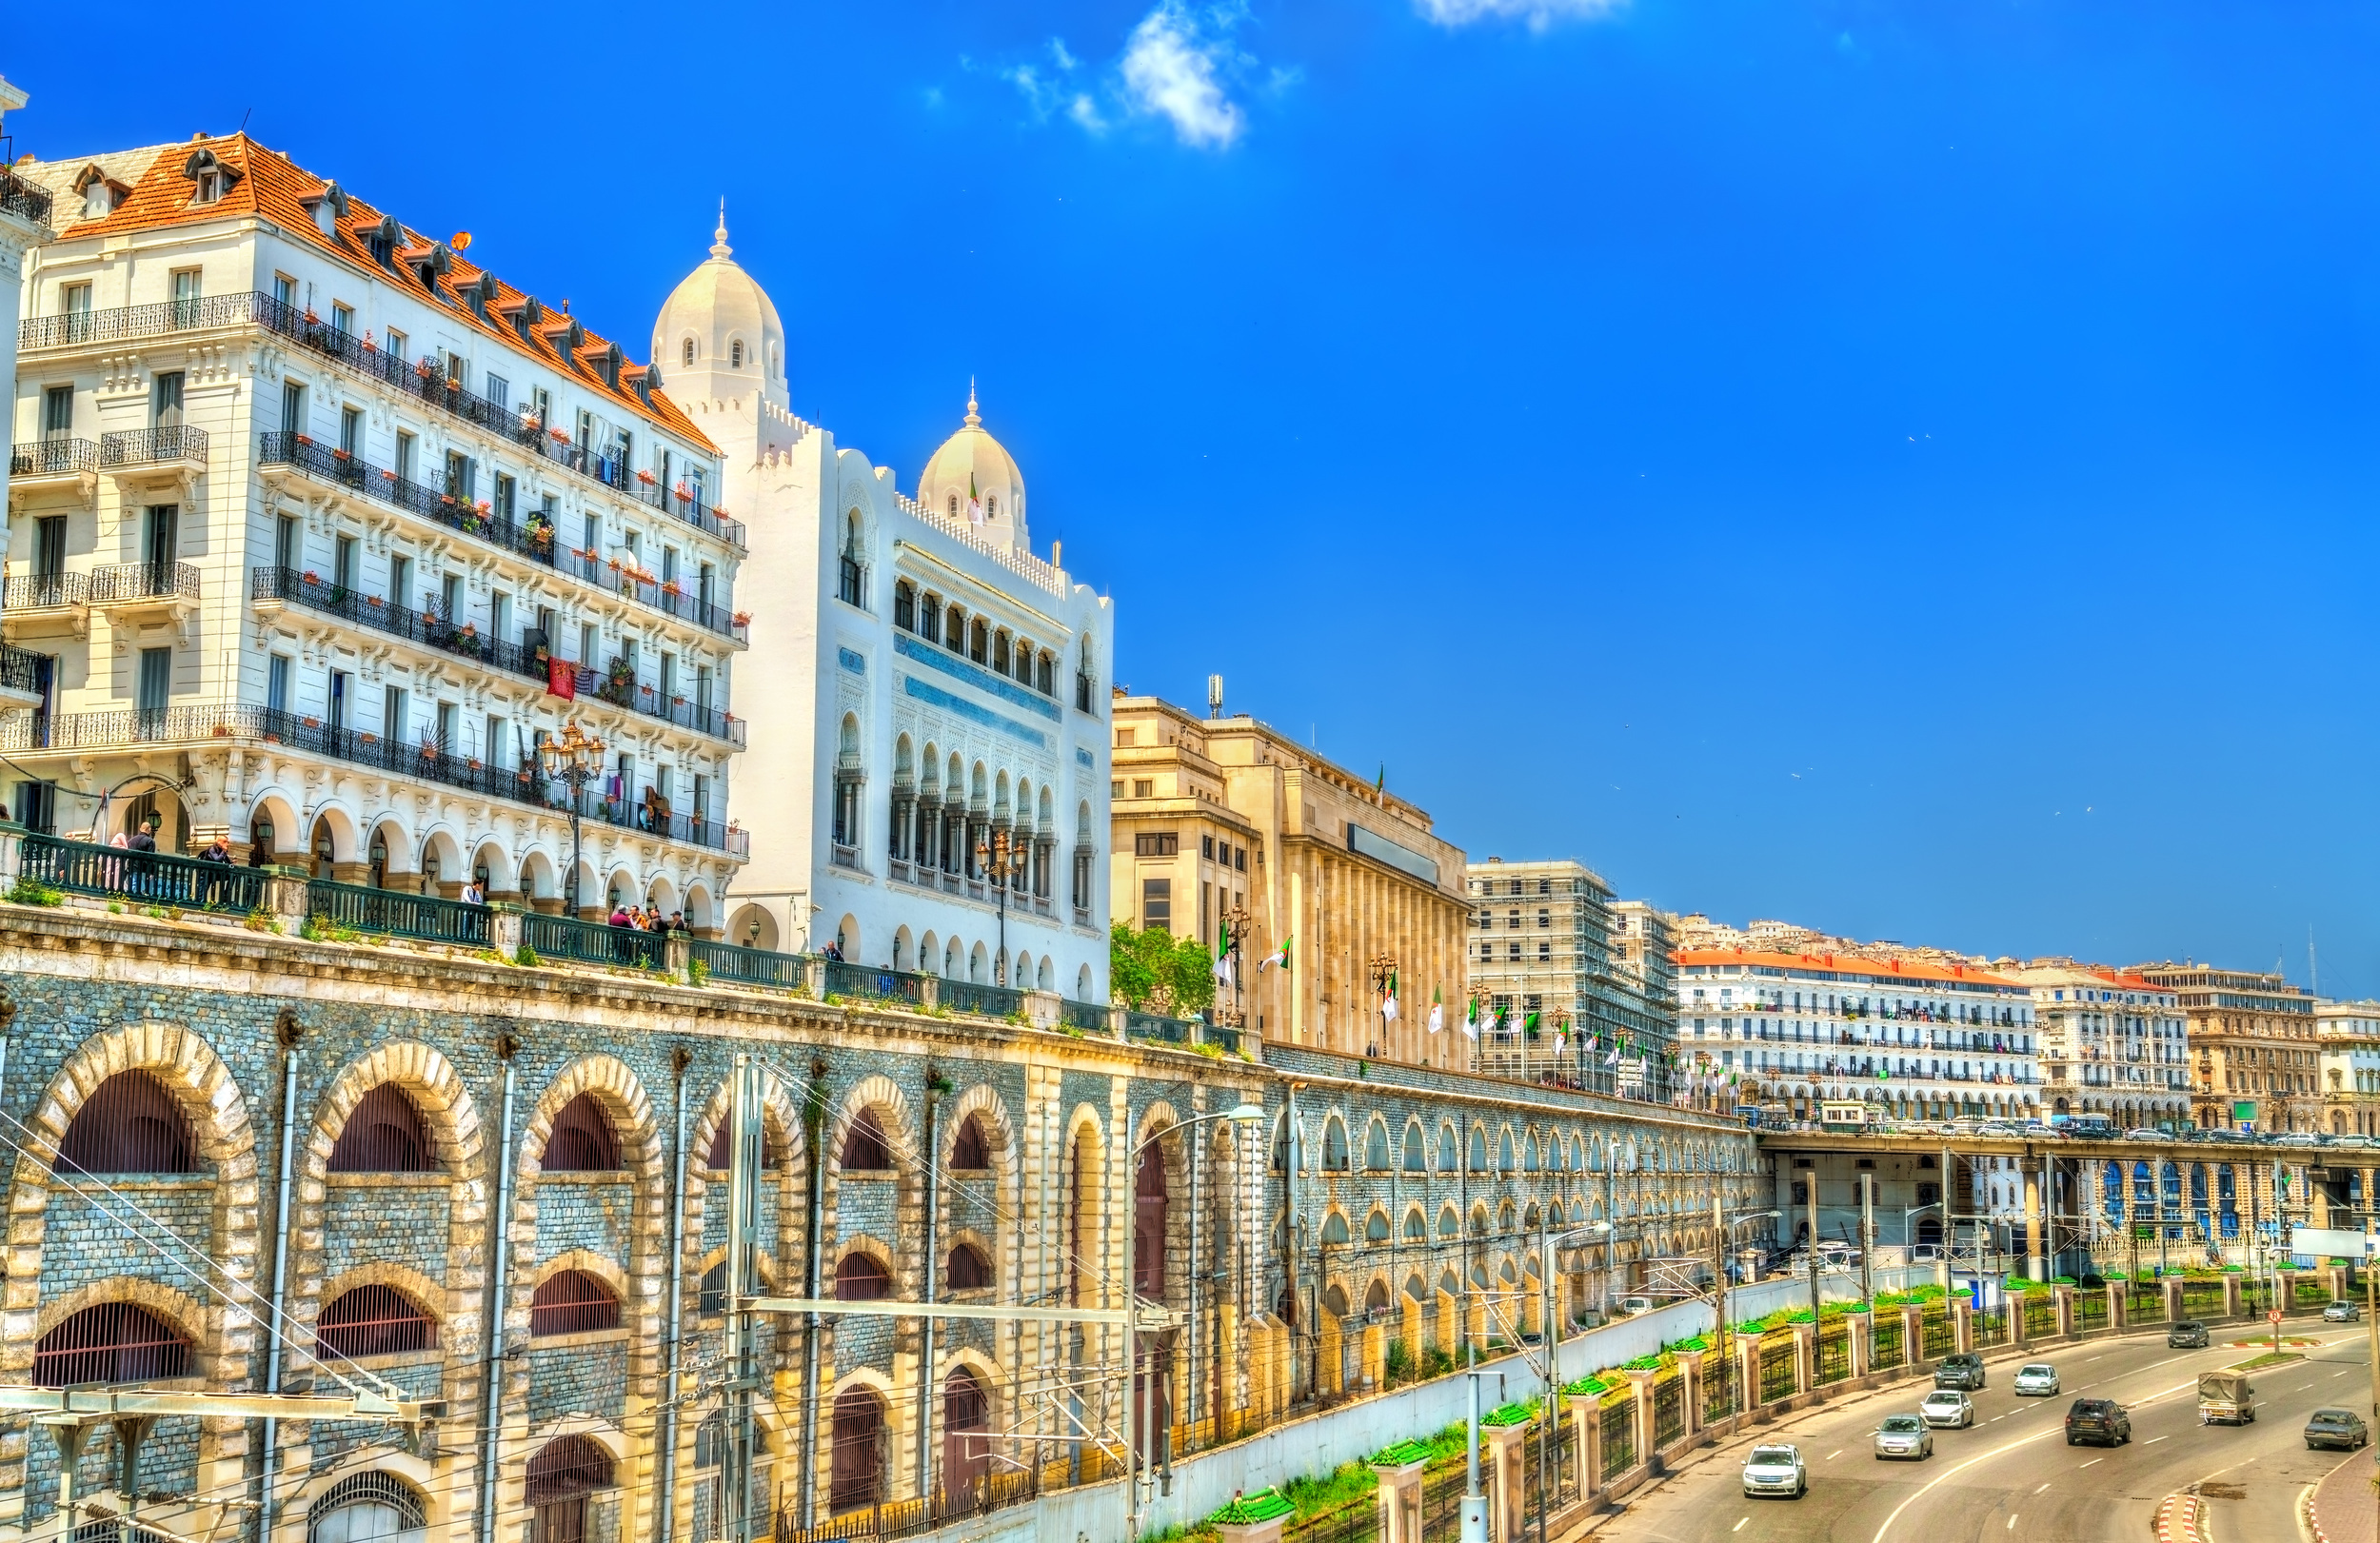 <p>Algeria’s official languages are Arabic and Berber, but French is also commonly understood. While not as widely used as in neighboring Morocco, it will be your best bet if you don’t speak one of the official languages. </p><p>You may also like: <a href='https://www.yardbarker.com/lifestyle/articles/20_reliable_home_remedies_that_will_actually_work_for_you_040424/s1__36051191'>20 reliable home remedies that will actually work for you</a></p>